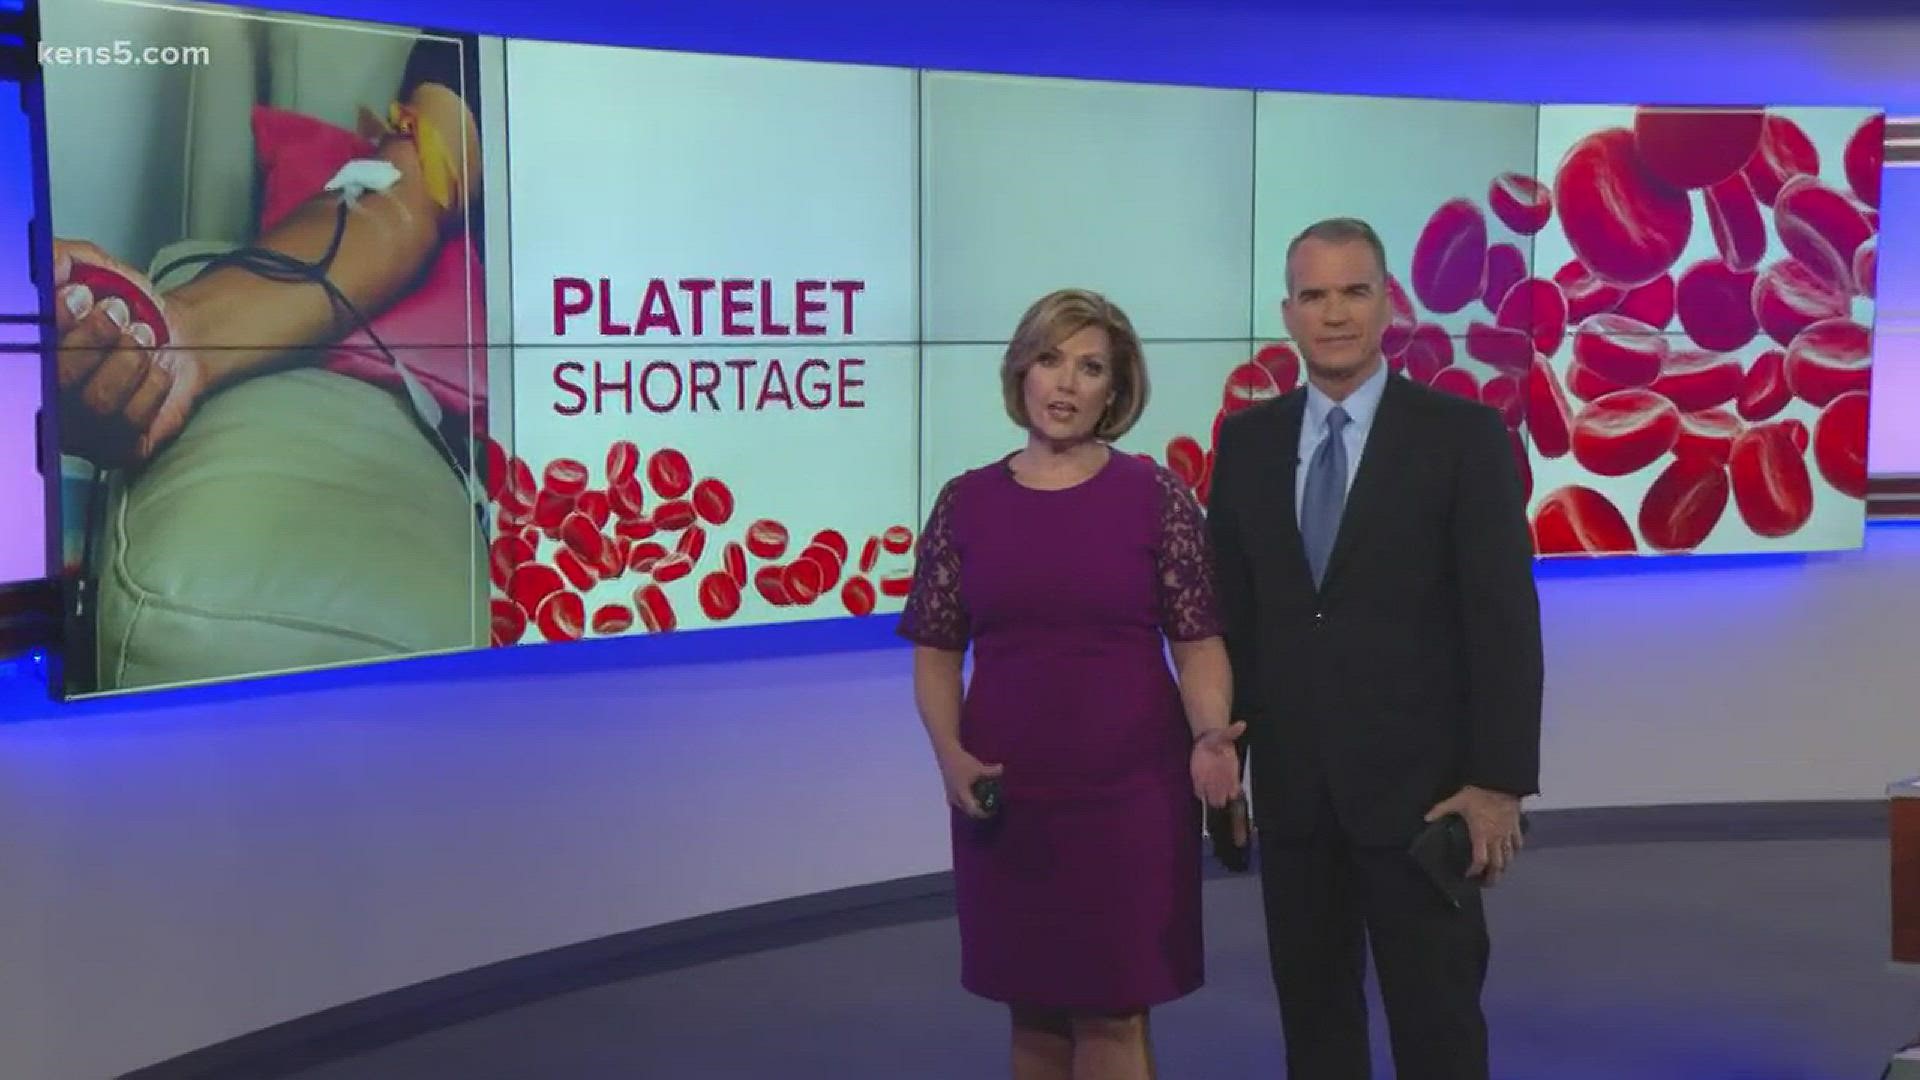 South Texas blood and tissue center struggles to stock the shelves with platelets - the vital blood cells needed for those patients. Eyewitness News reporter Adi Guajardo has more.